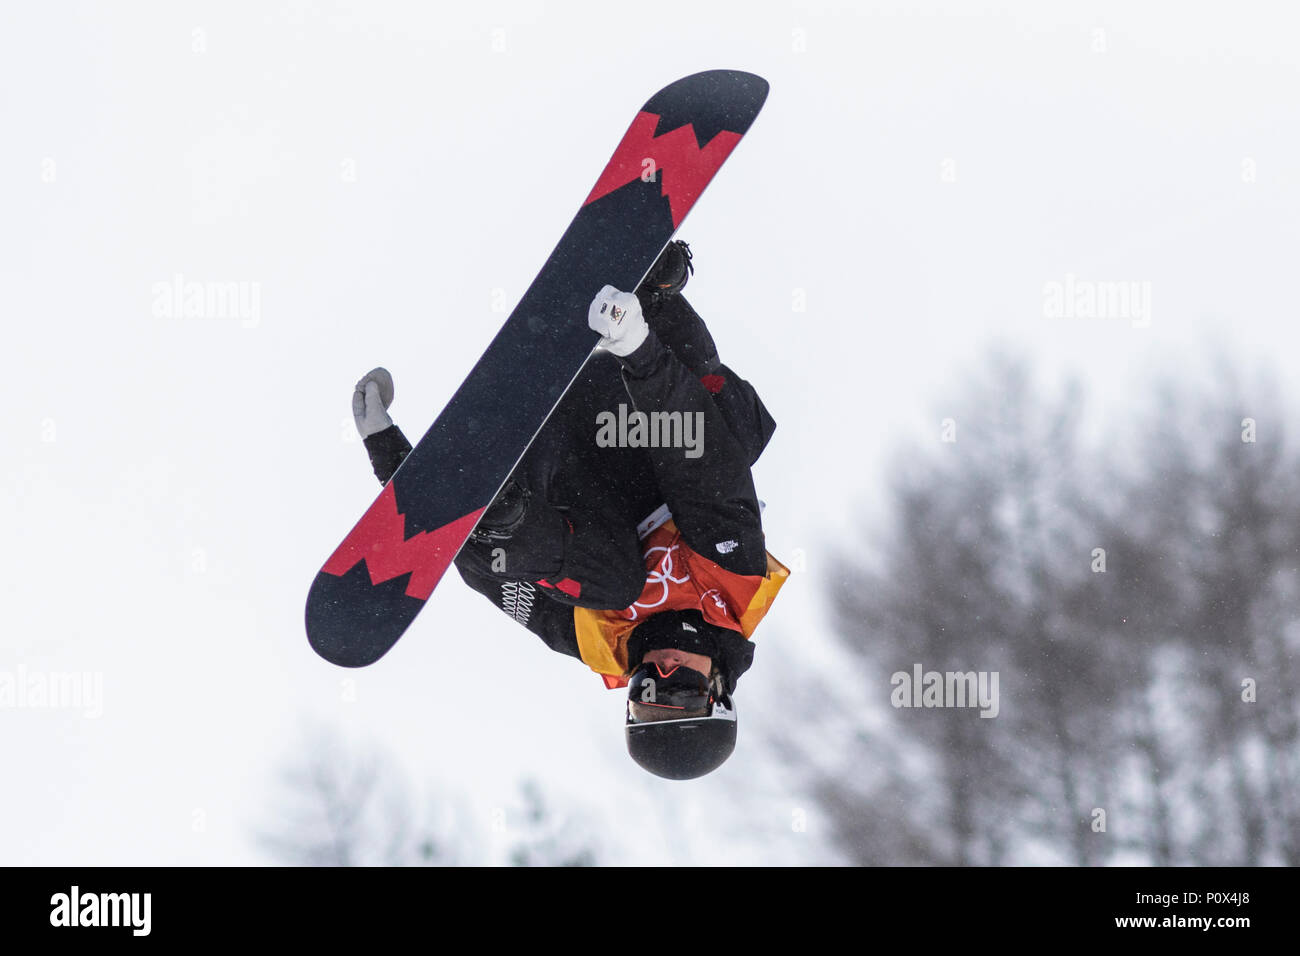 Rakai Tait (NZL) competing in  the Men's Snowboarding Half Pipe Qualification at the Olympic Winter Games PyeongChang 2018 Stock Photo